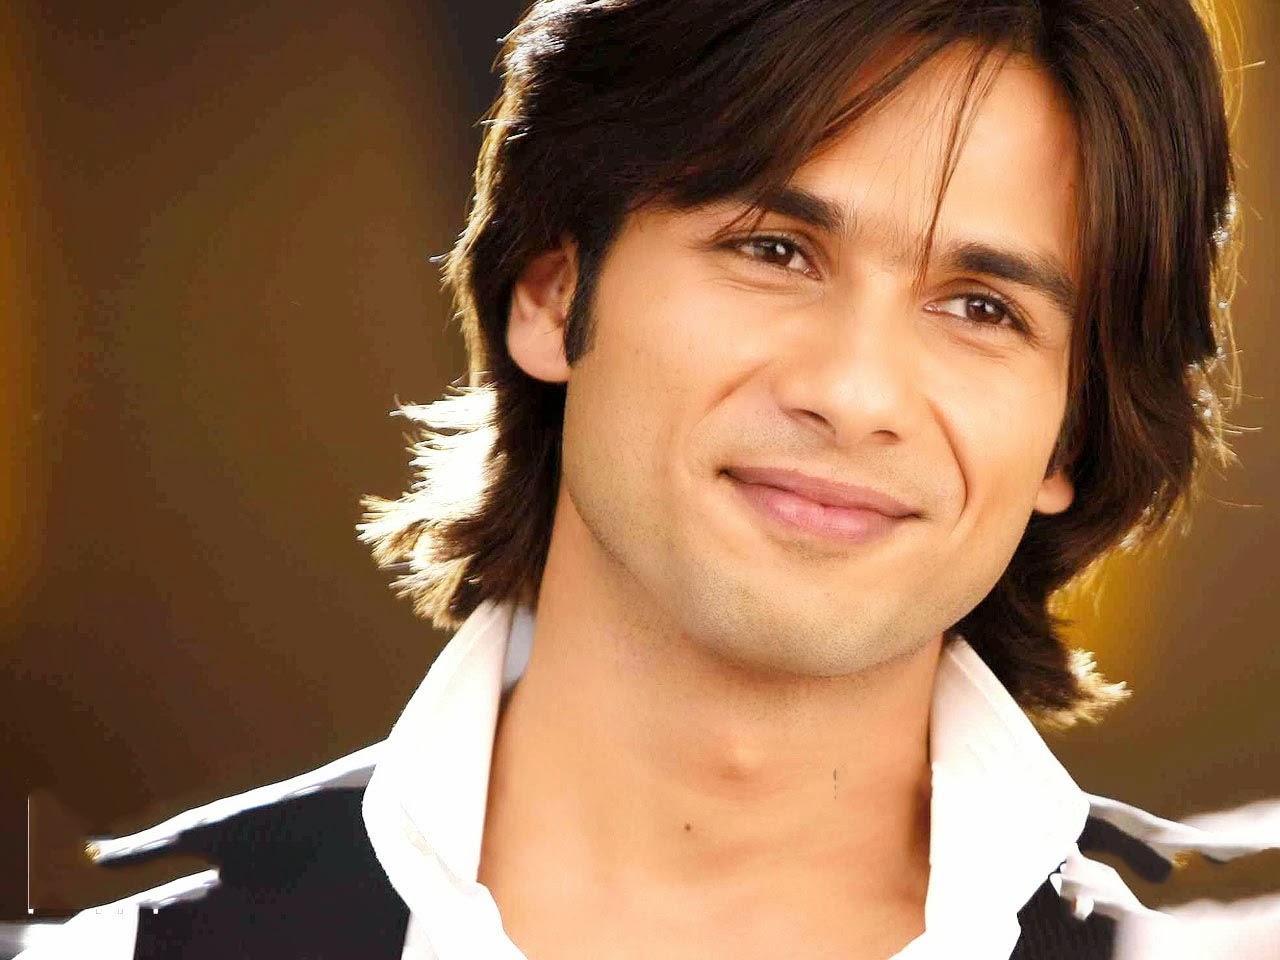 Shahid Kapoor Photo Gallery: Photos, Pictures, Filmography and Wallpapers  of Shahid Kapoor at MensXP